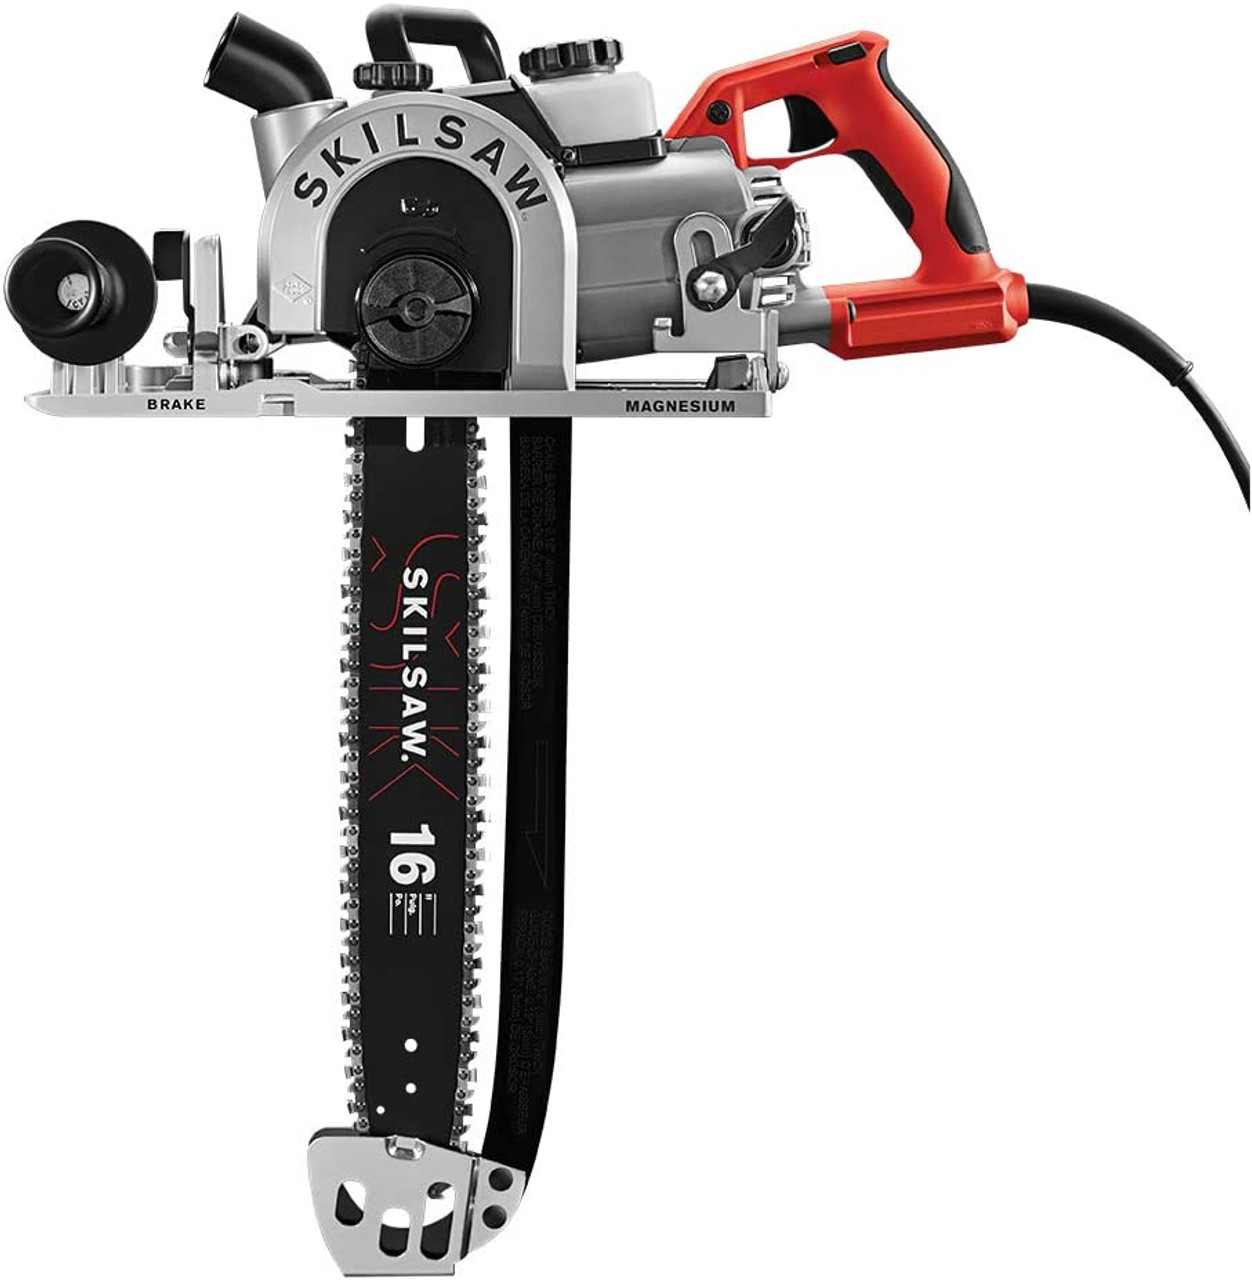 Skil SPT55-11 16 In. Worm Drive SAWSQUATCH Carpentry Chainsaw JB Tools